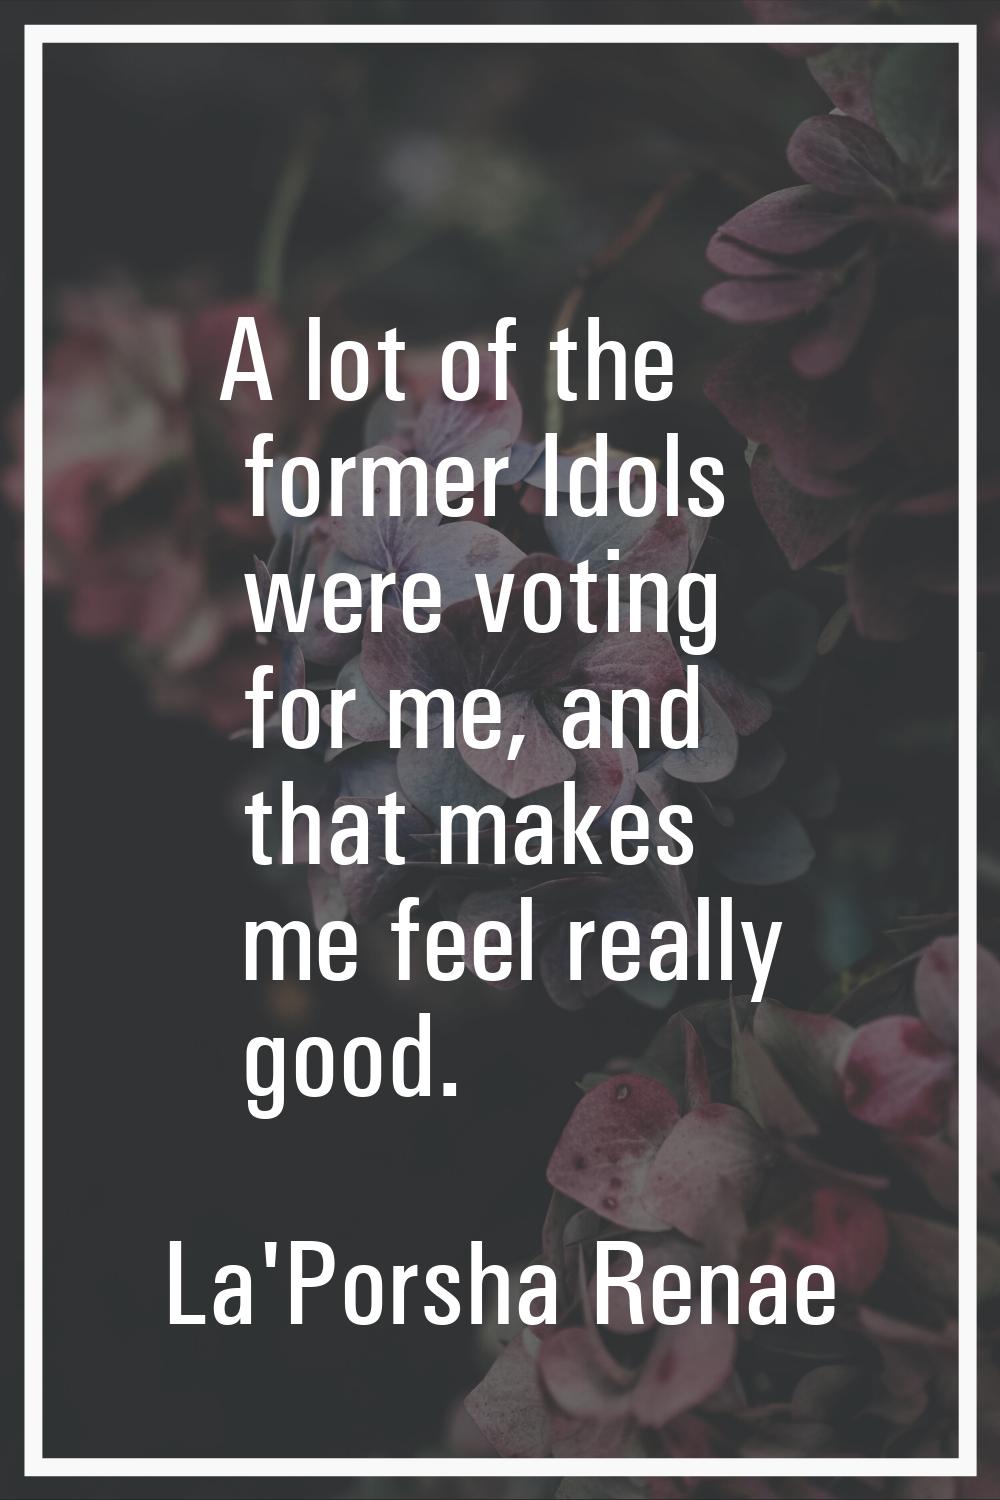 A lot of the former Idols were voting for me, and that makes me feel really good.